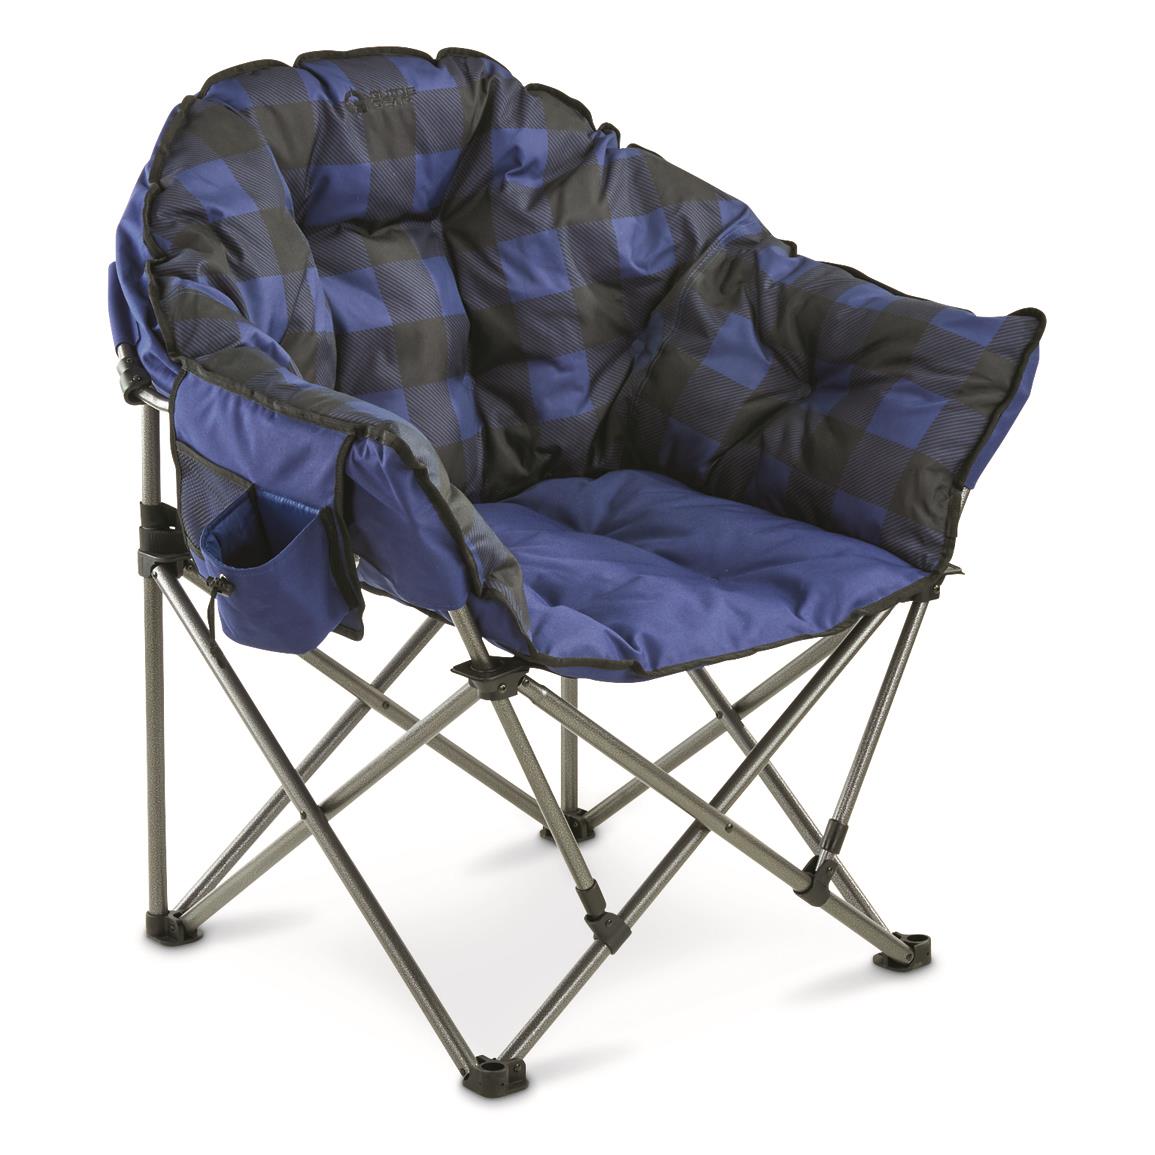 Guide Gear Oversized Club Camp Chair, 500lb. Capacity 703611